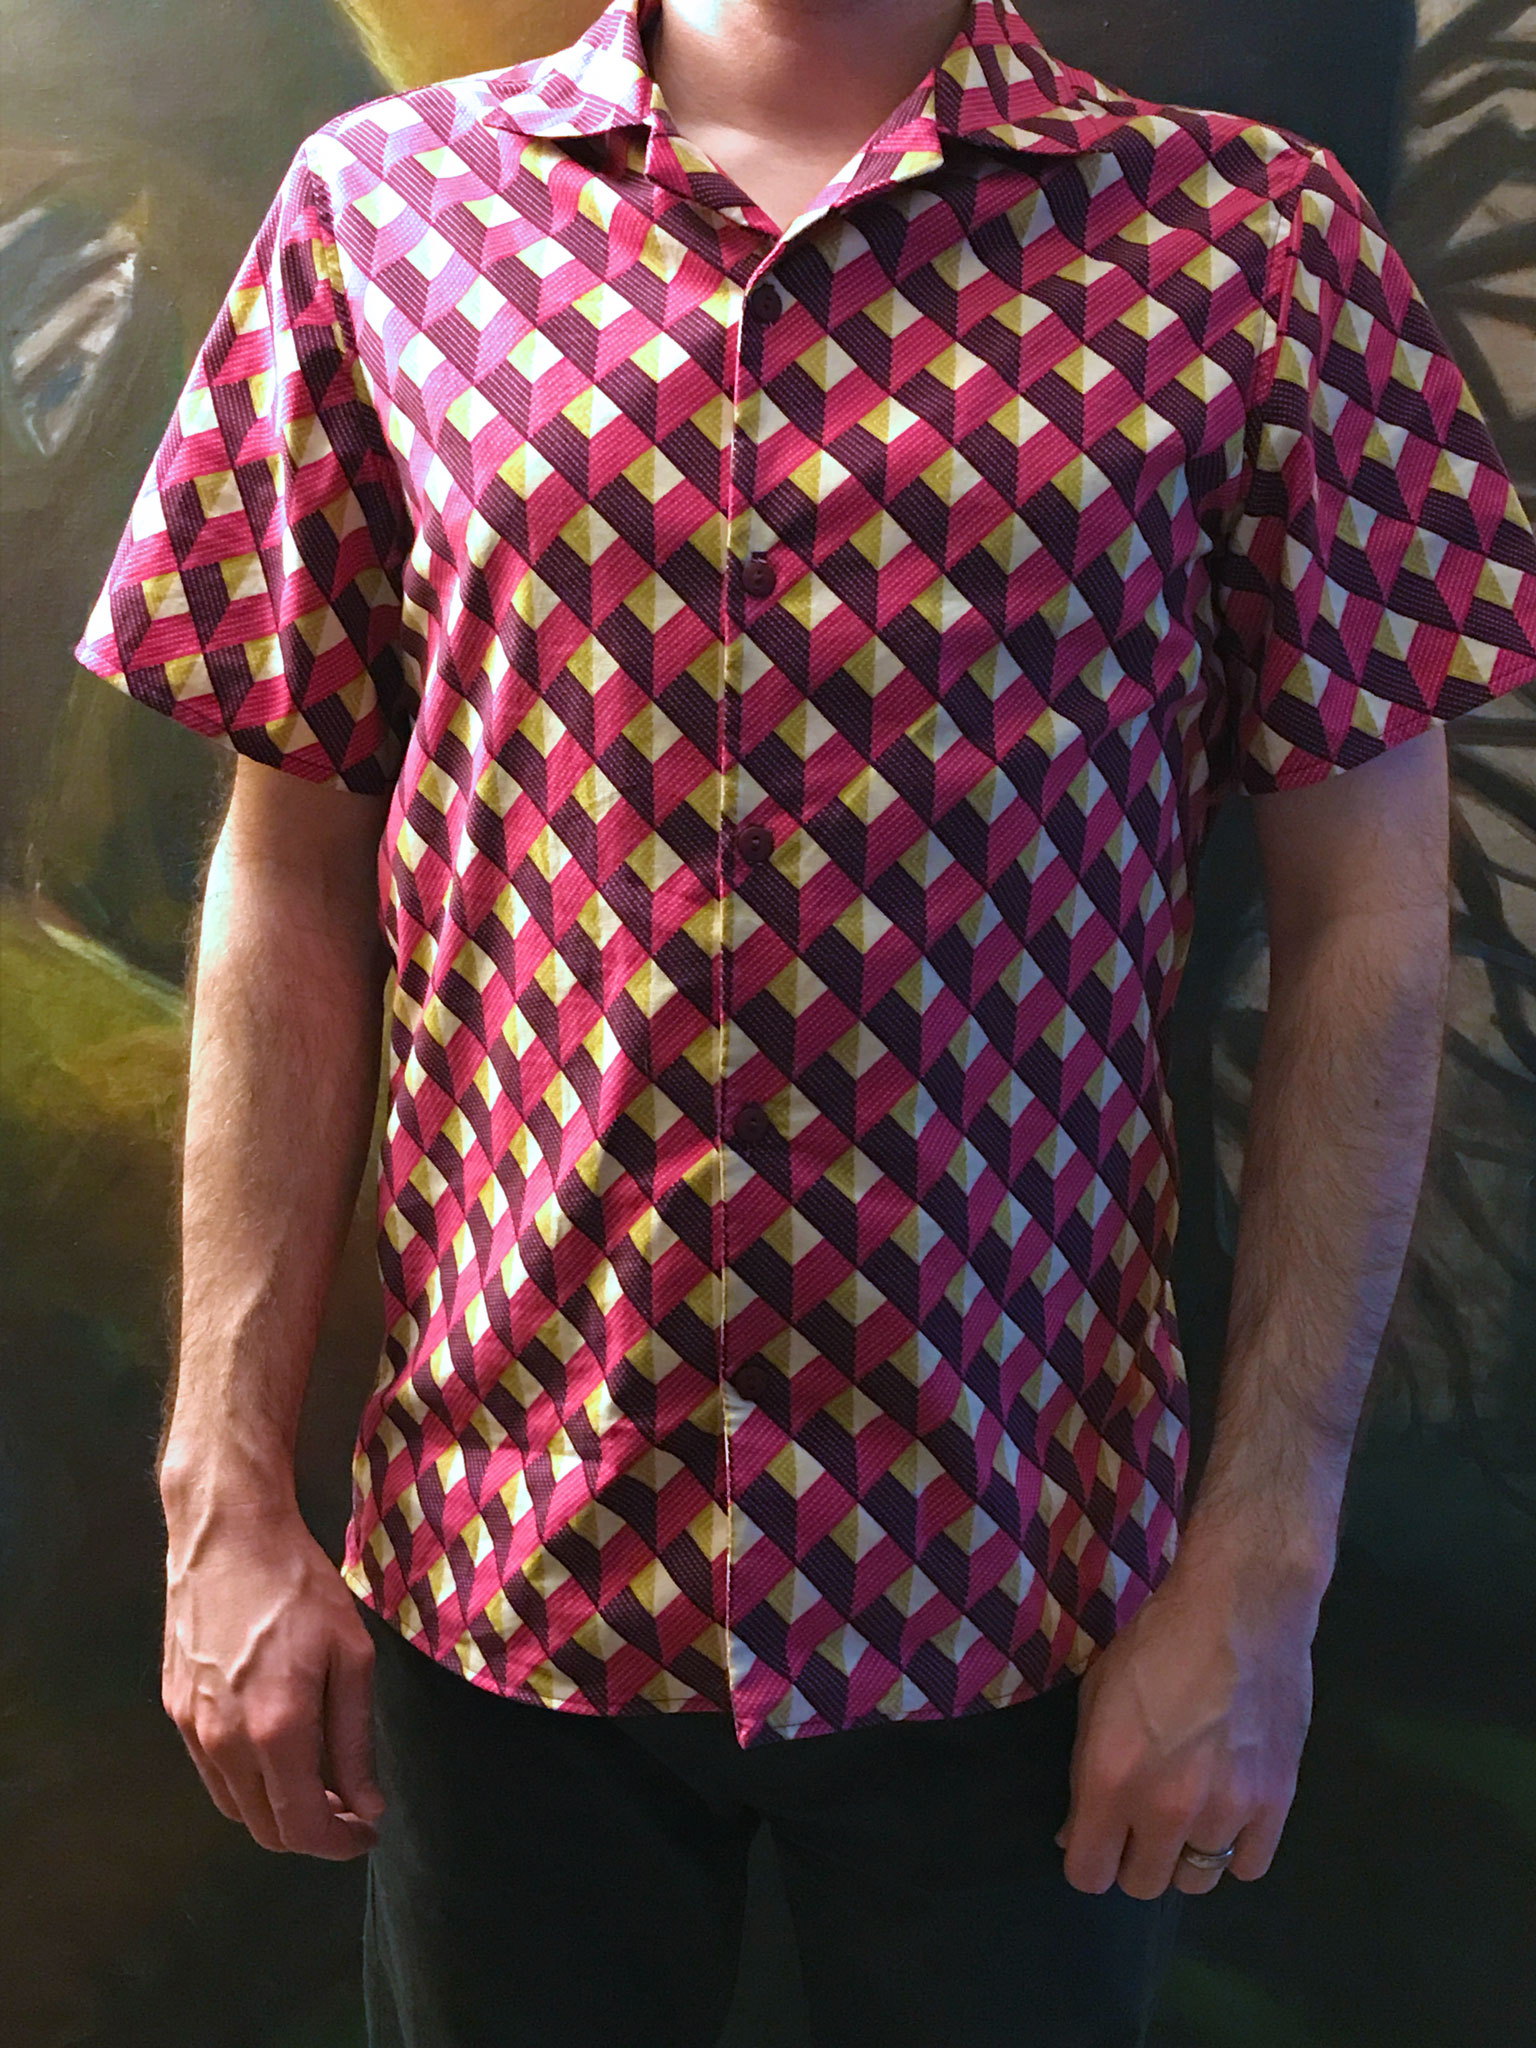 Completed shirt modeled by my husband. Front view.